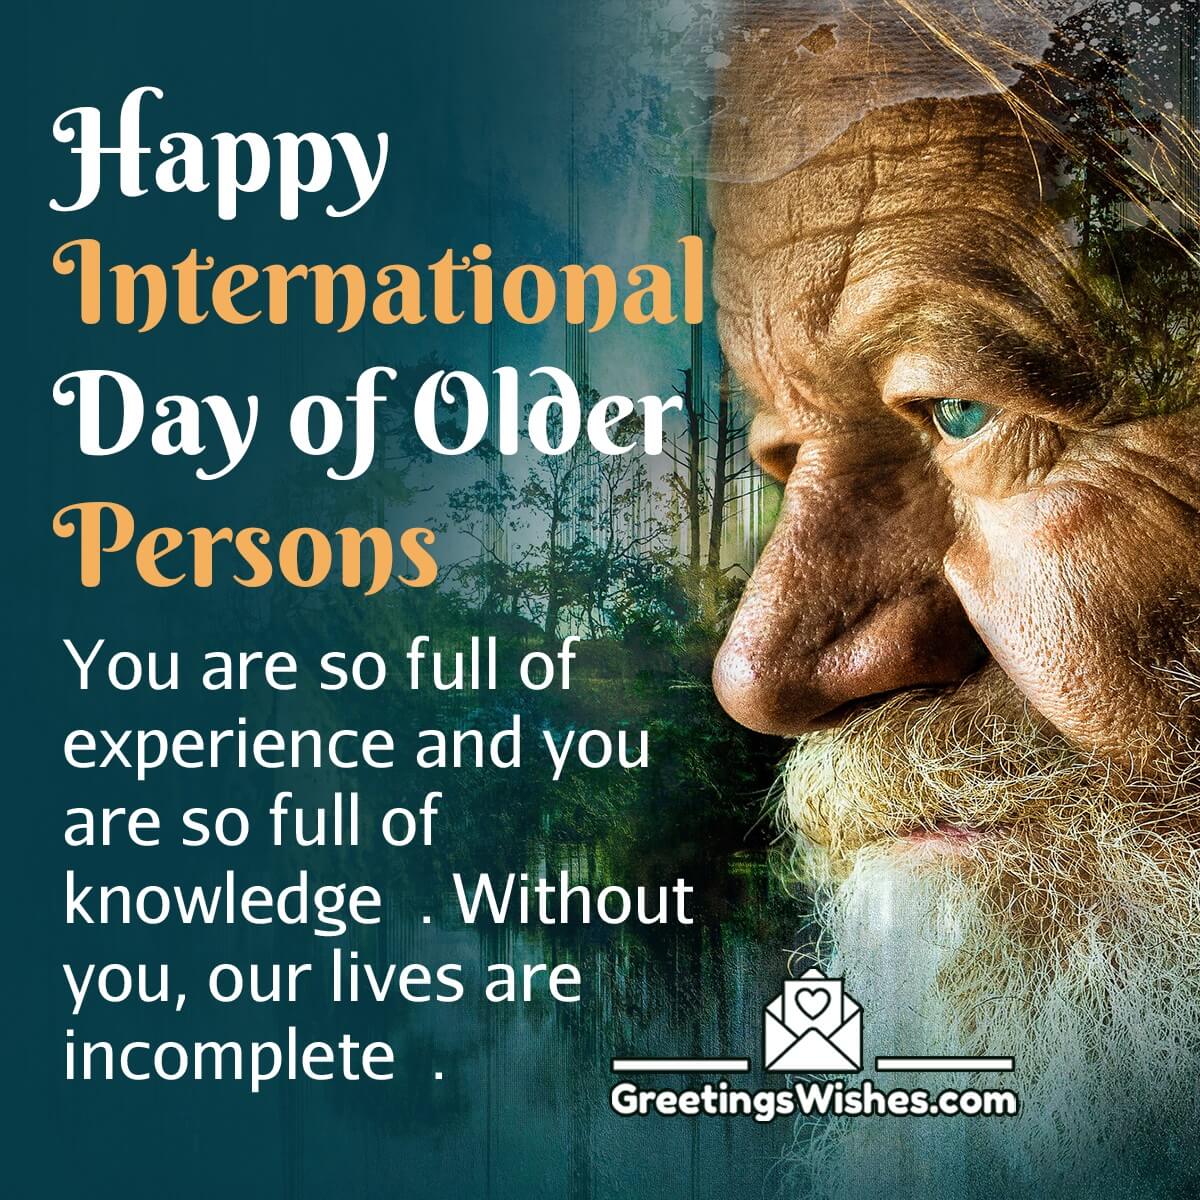 International Day of Older Persons Wishes Messages (1 October)